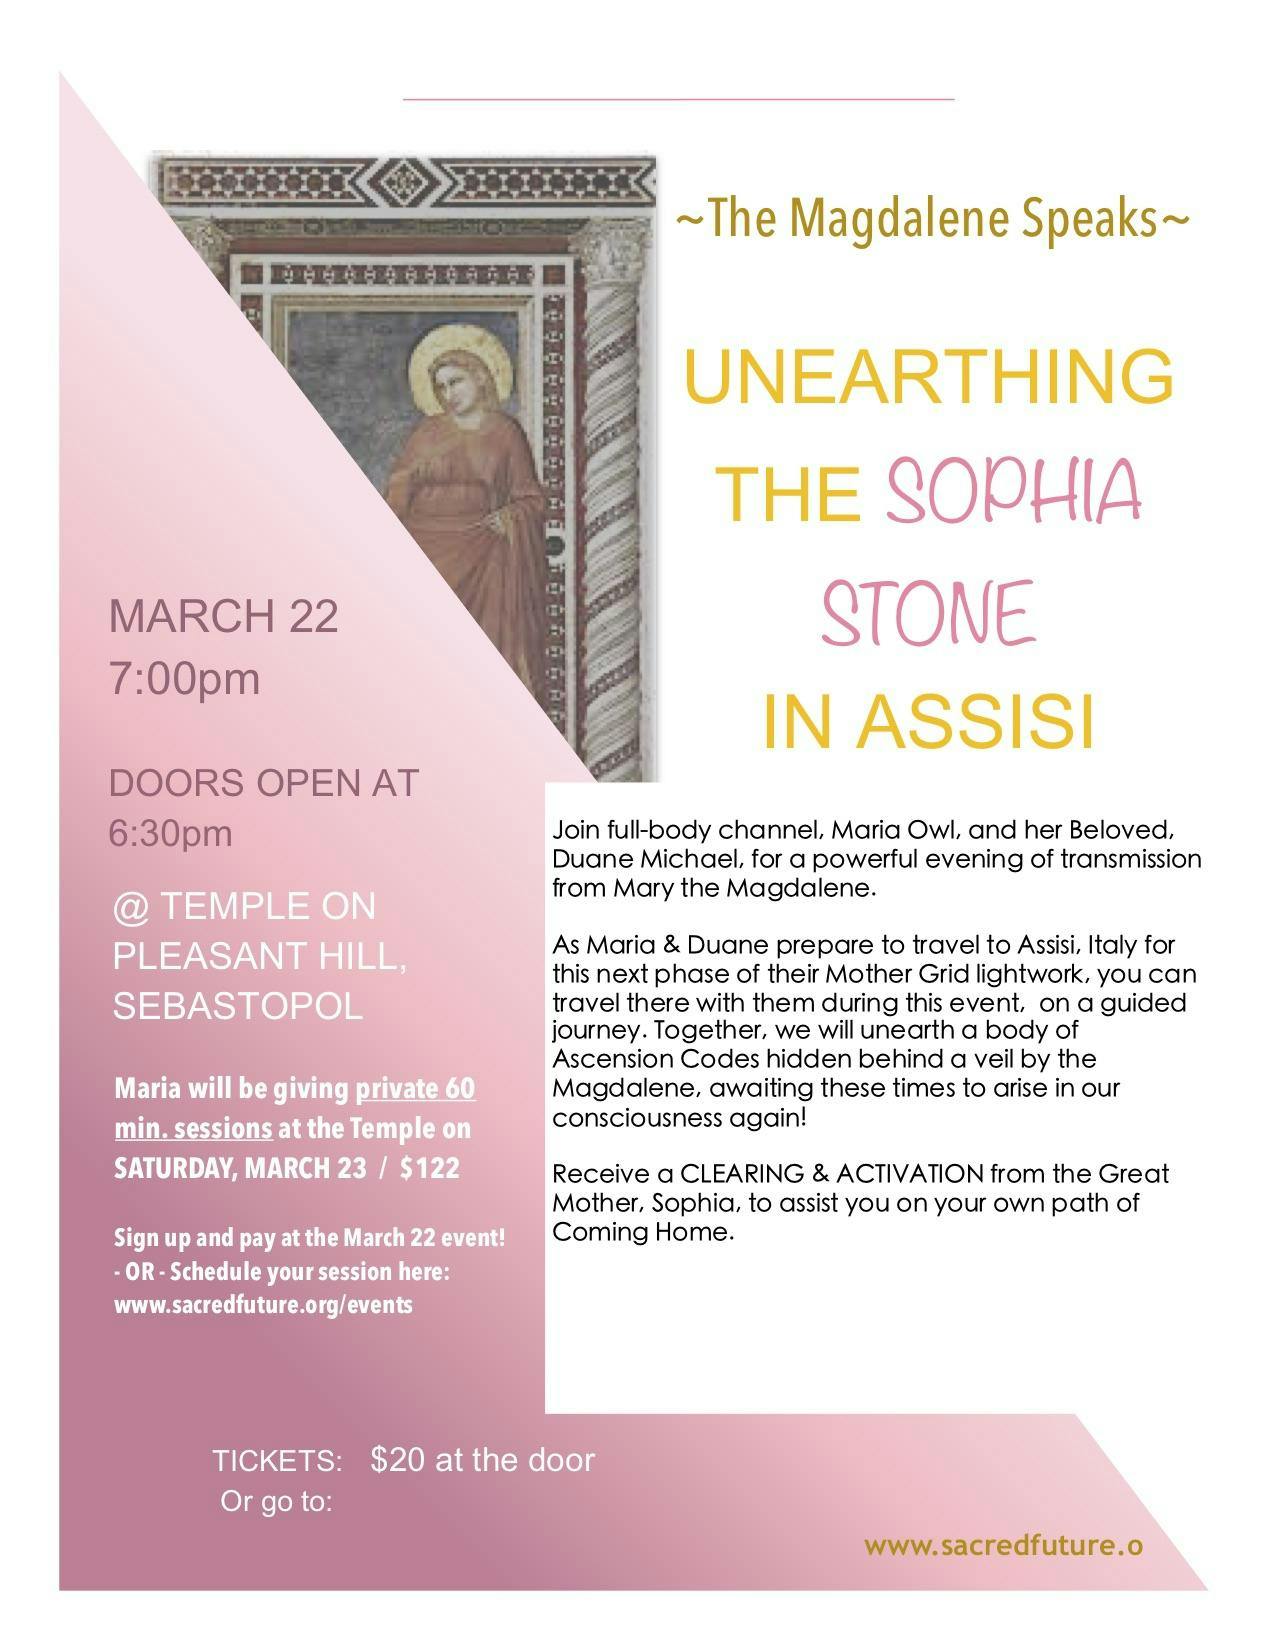 The Magdalene Speaks Unearthing the Sophia Stone in Assisi